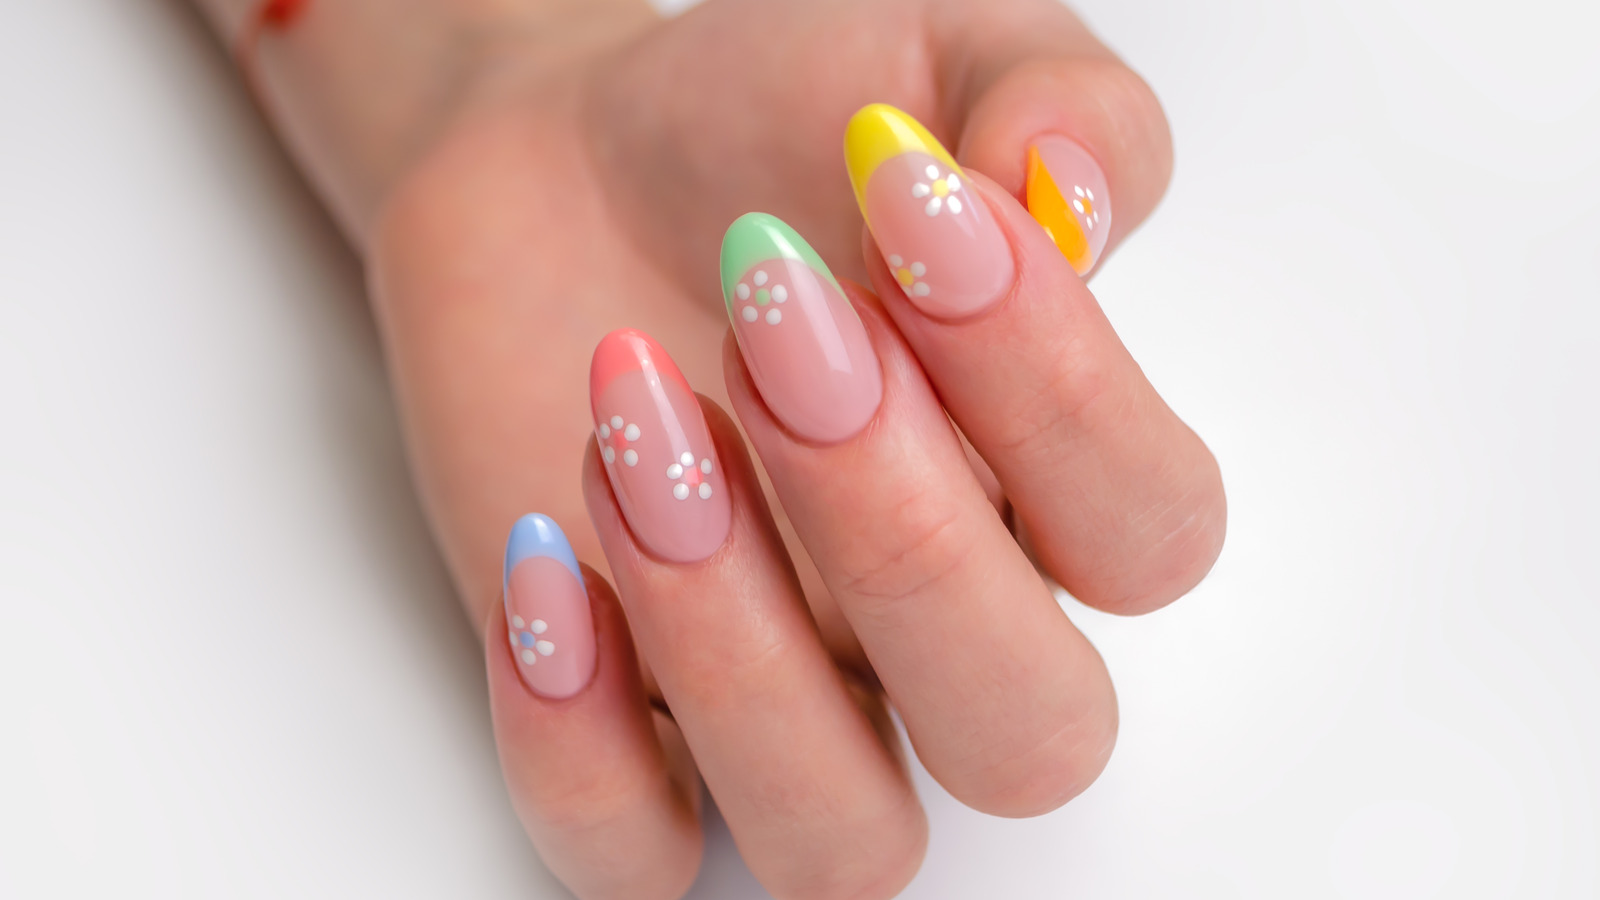 Daisy Nail Art and Makeup Studio - Home - wide 1